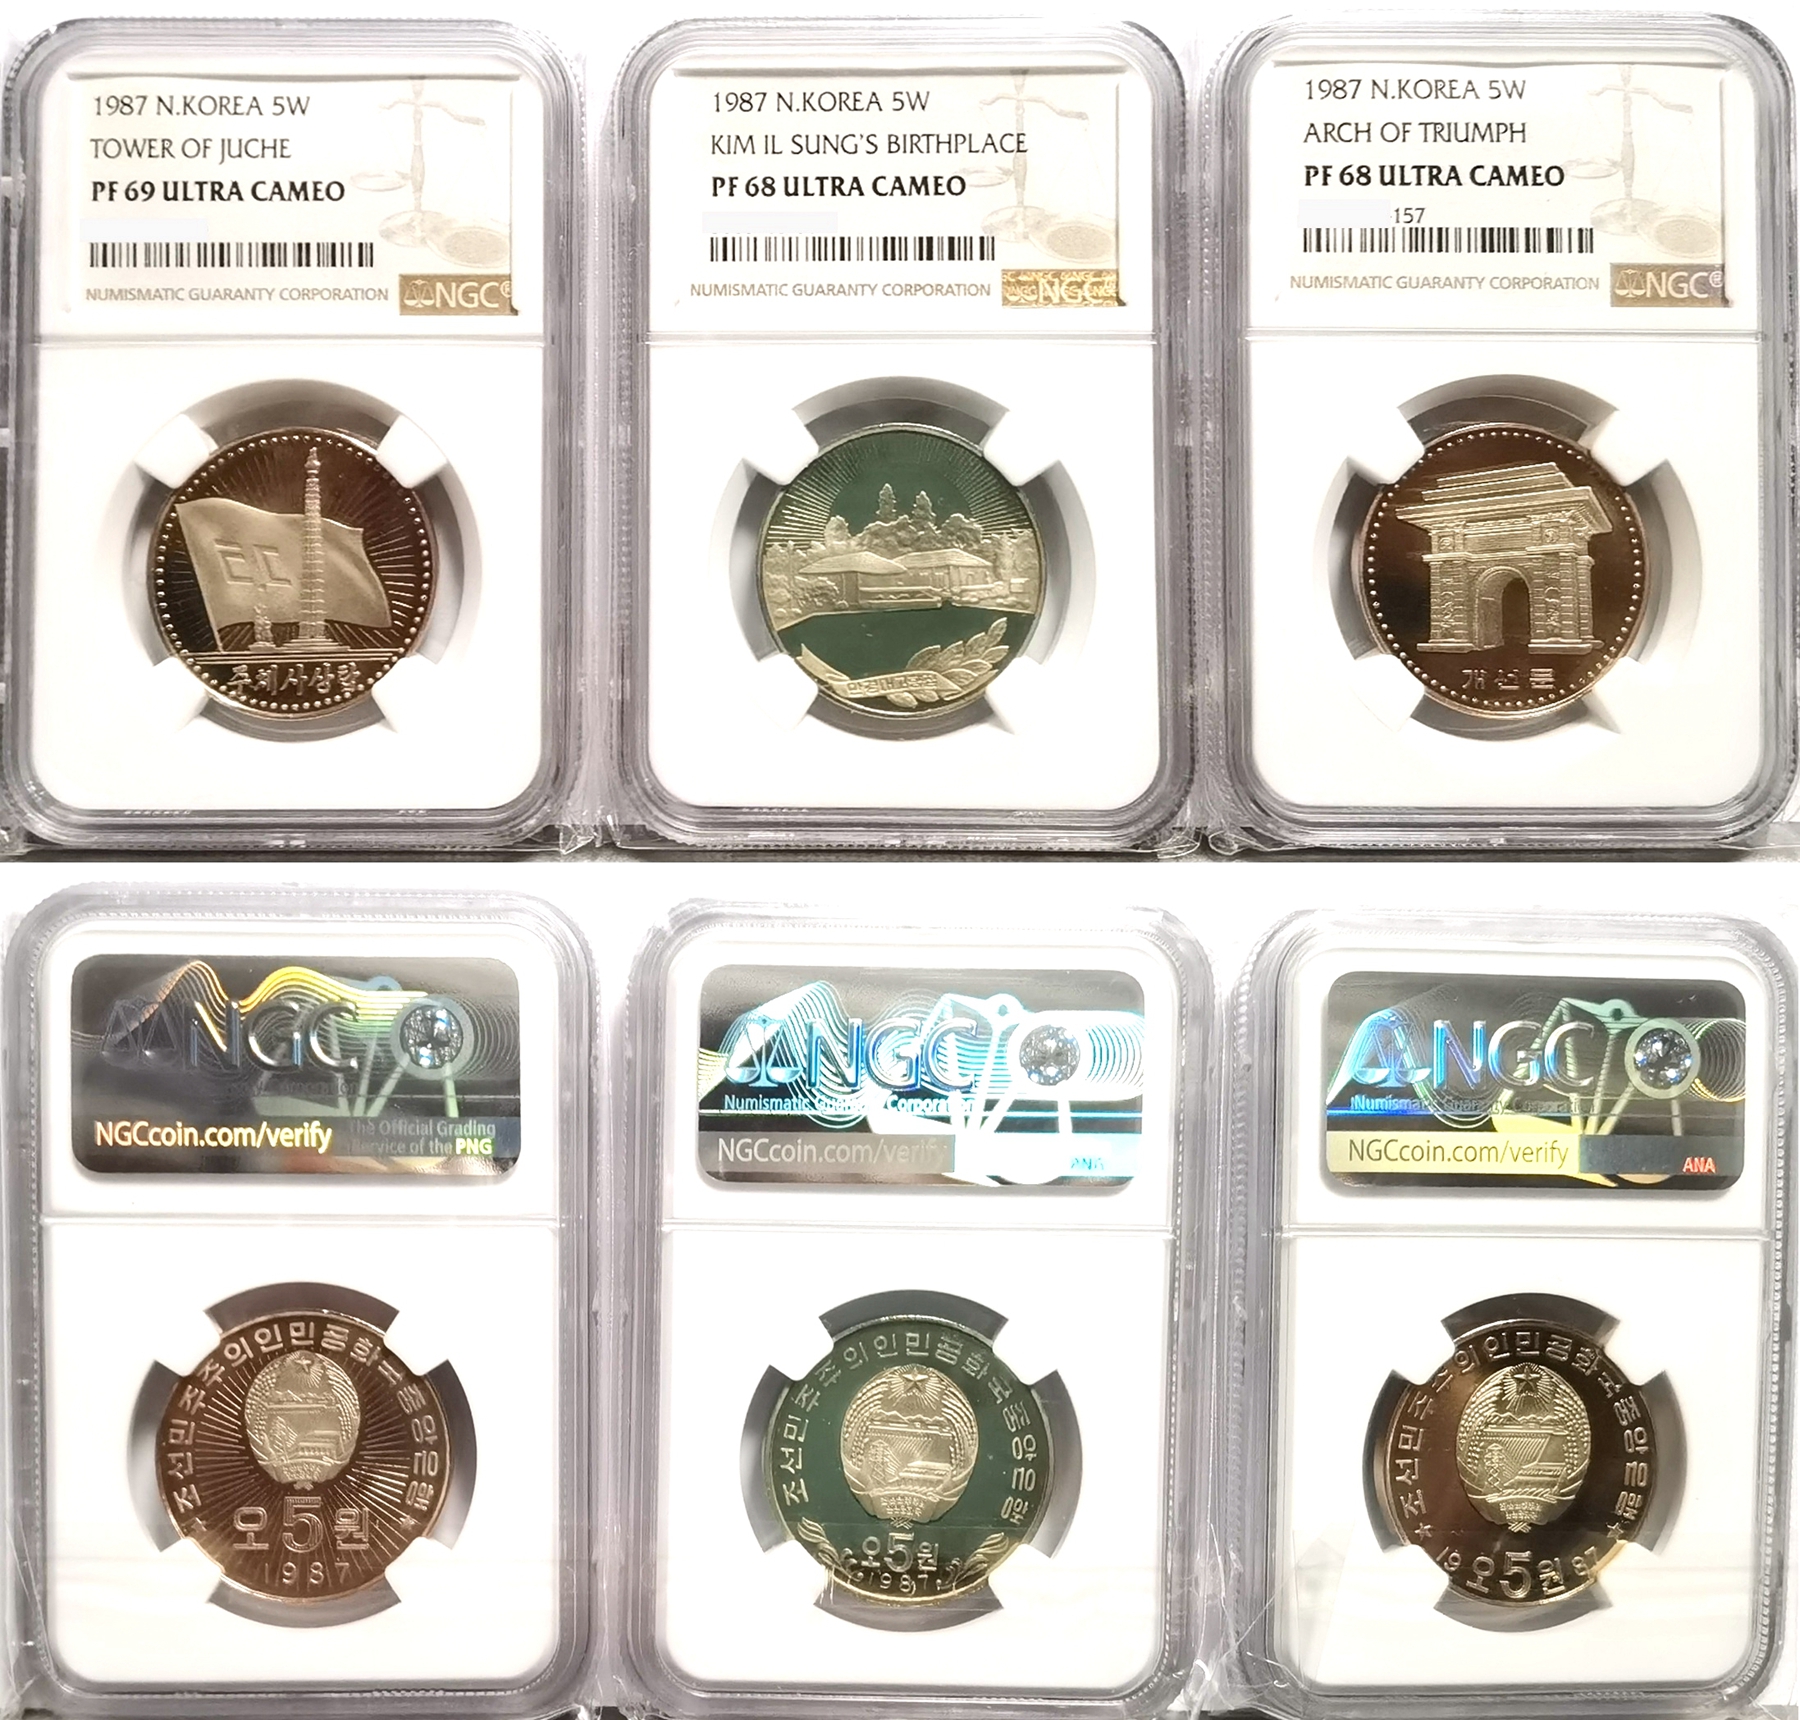 L3085, Korea First Proof Coin "Arch of Triumph" 5 Won, 3 Pcs 1987, NGC 68